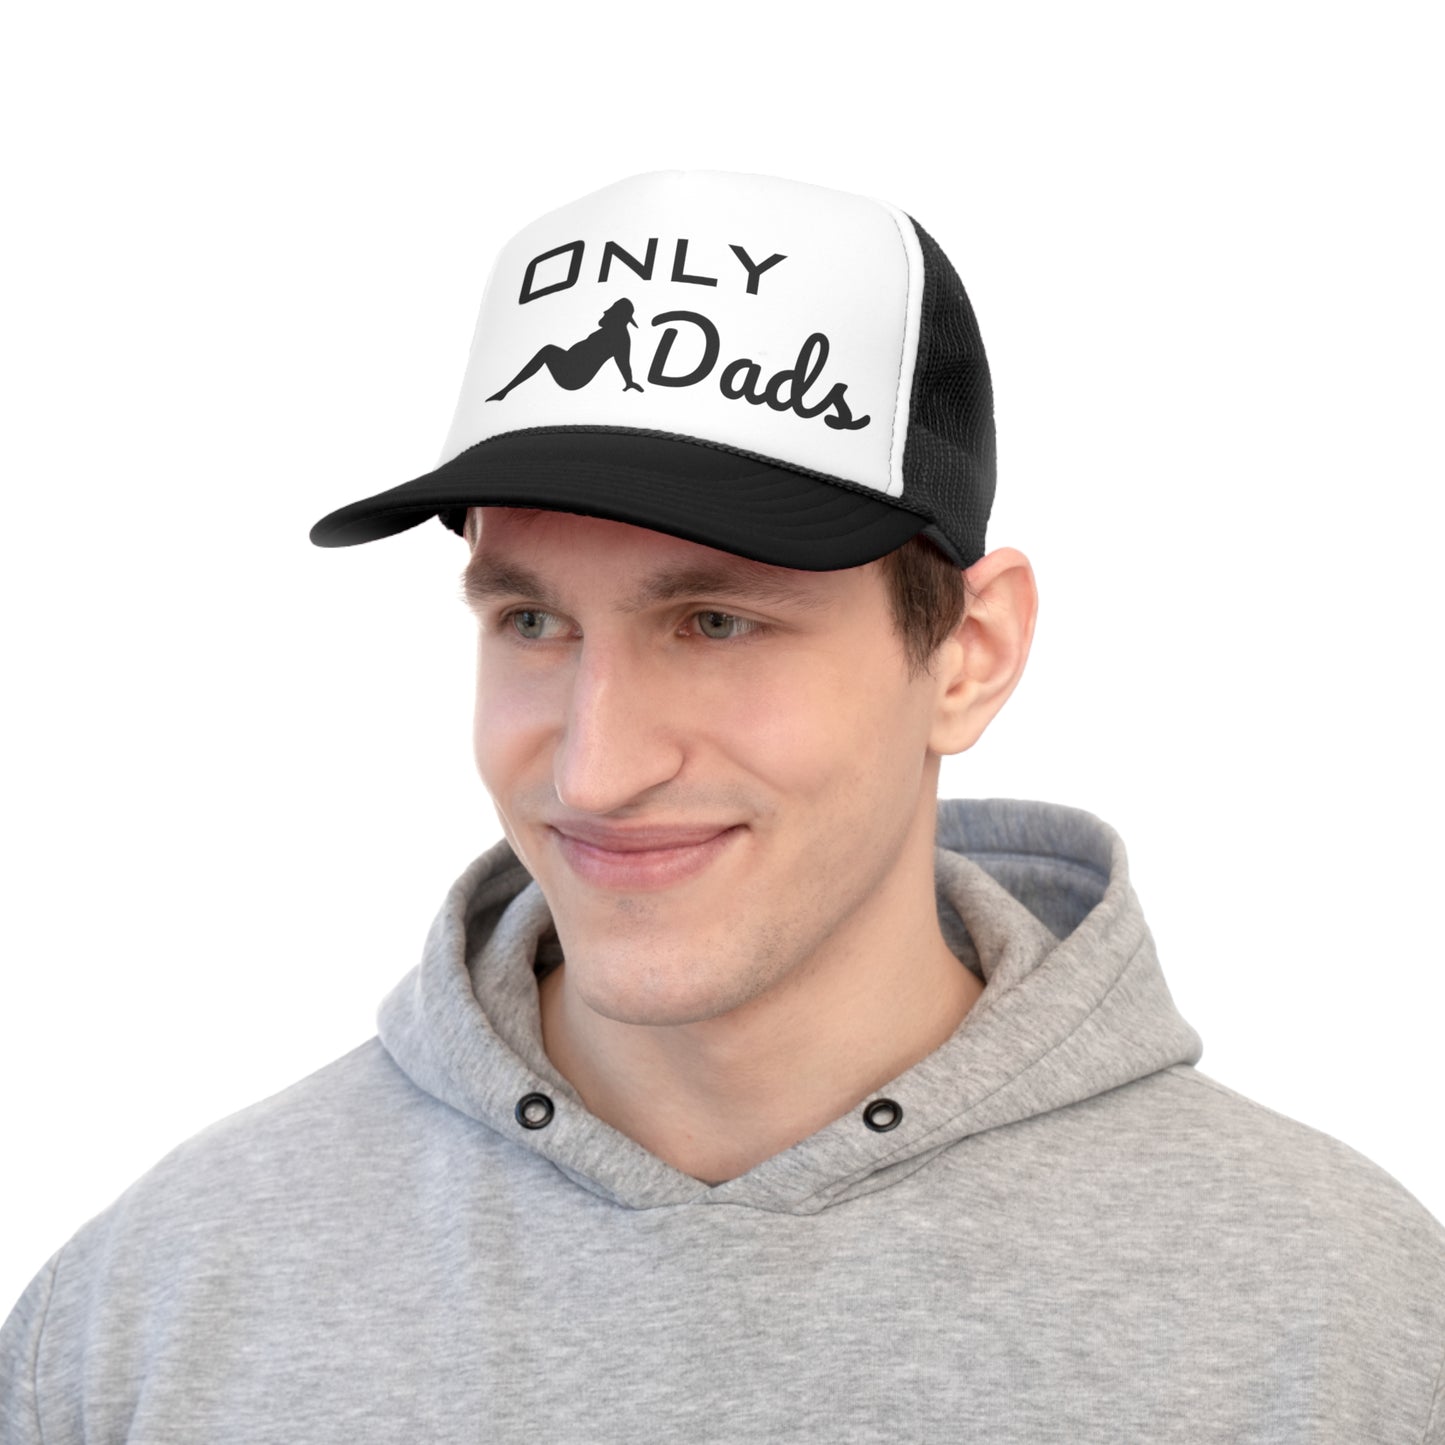 "Only Dads" trucker cap with dad bod graphic and playful slogan.